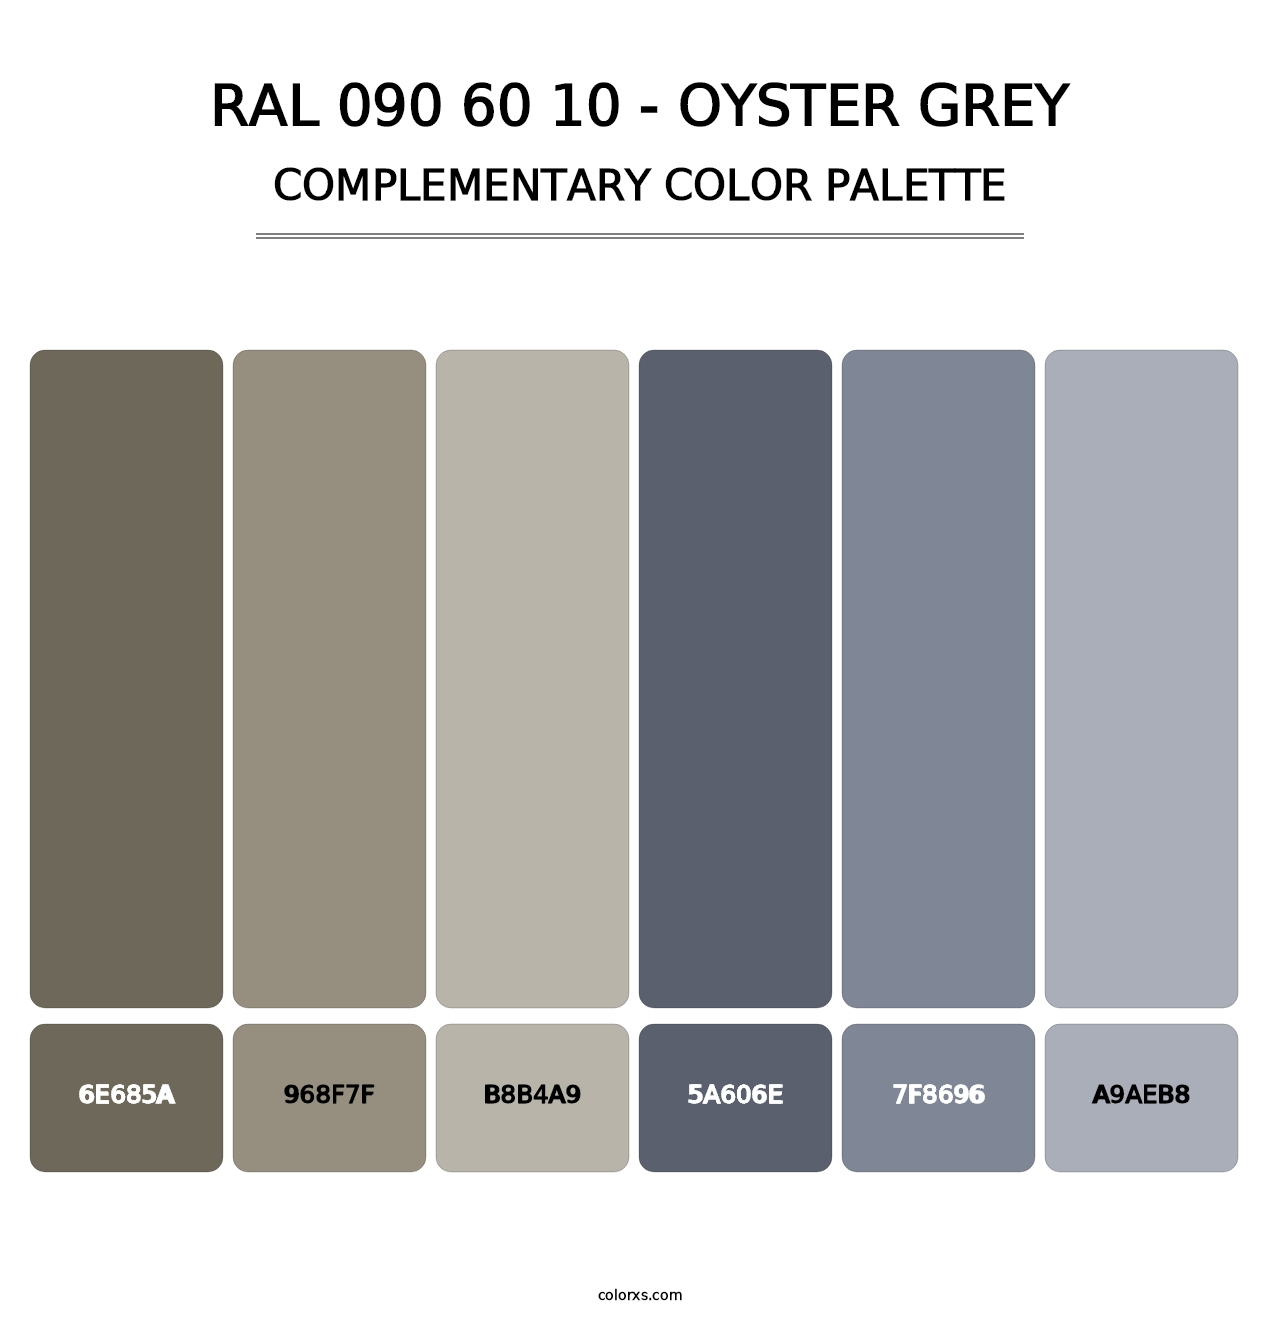 RAL 090 60 10 - Oyster Grey - Complementary Color Palette